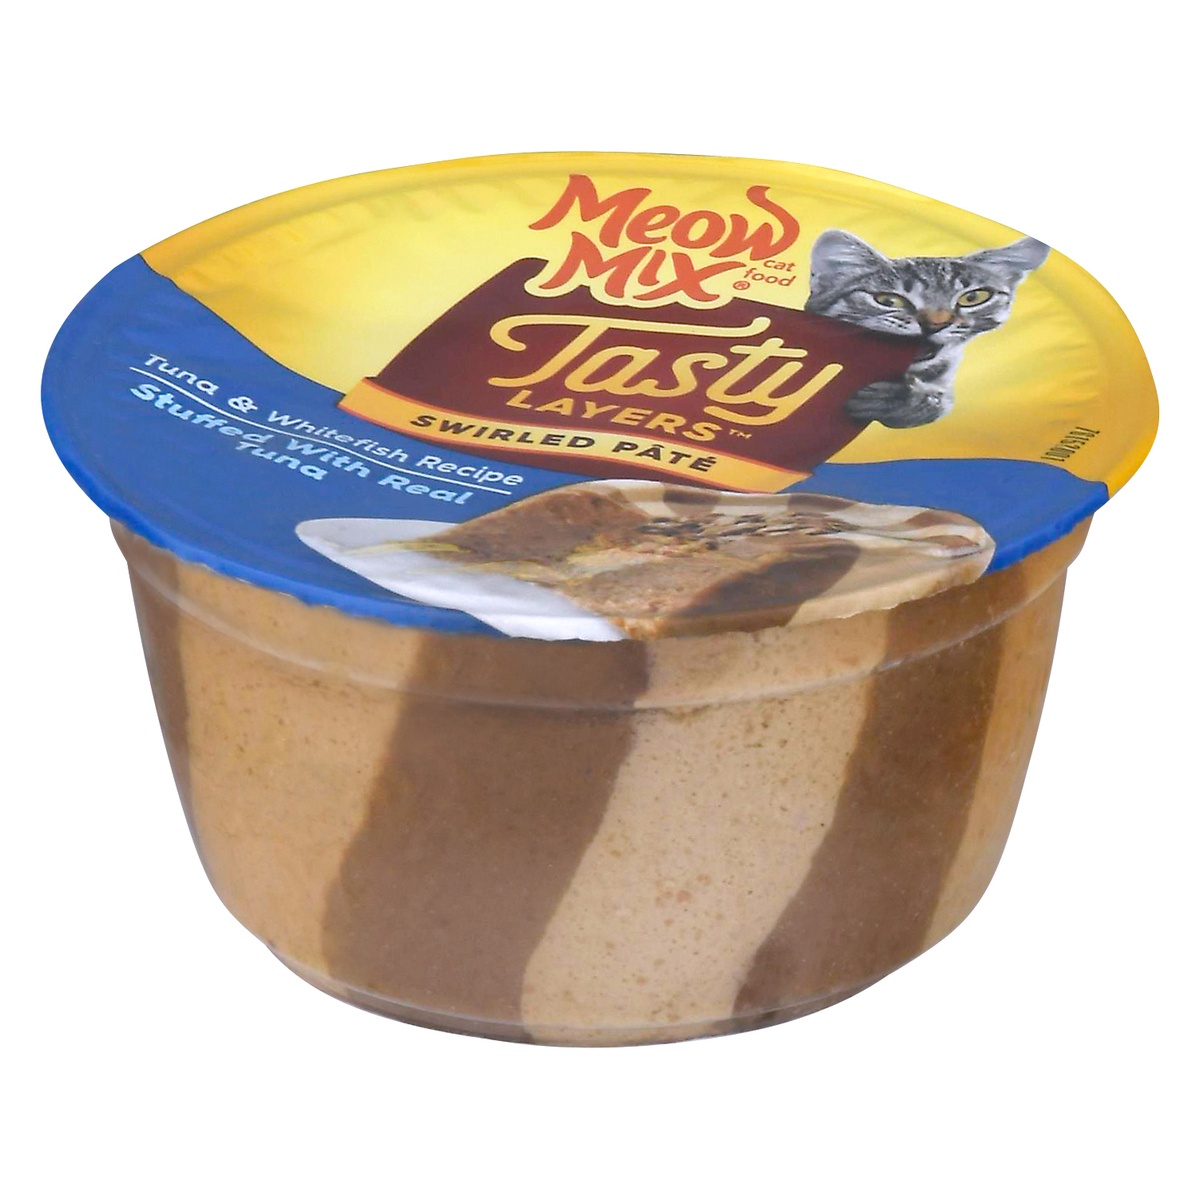 slide 3 of 10, Meow Mix Tasty Layers Swirled Paté Tuna and Whitefish Recipe Stuffed with Real Tuna Wet Cat Food, 2.75 oz